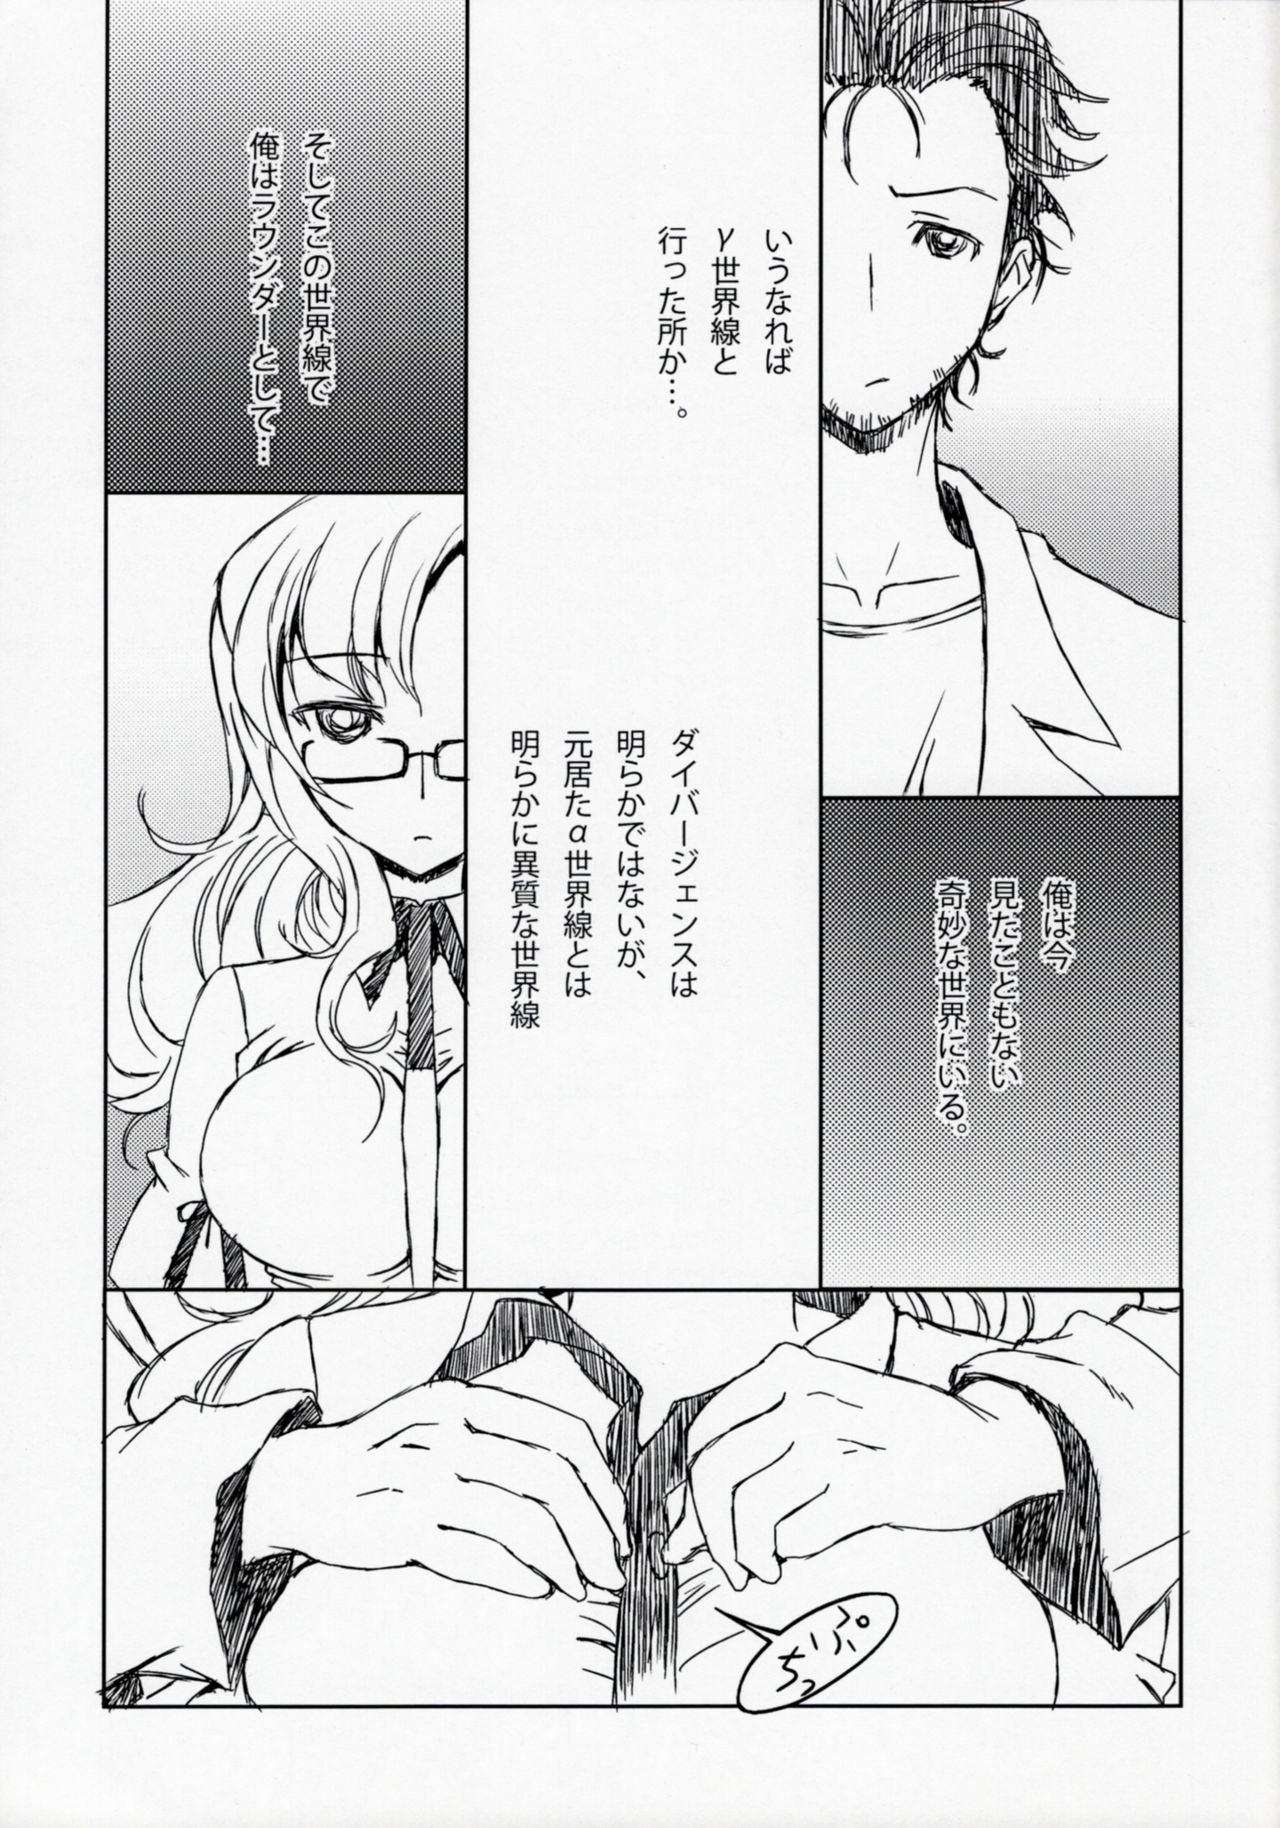 (Chaos;Gate) [LEAM26 (AXiS) Unmei Ruten no Jekyll (Steins;Gate) page 2 full